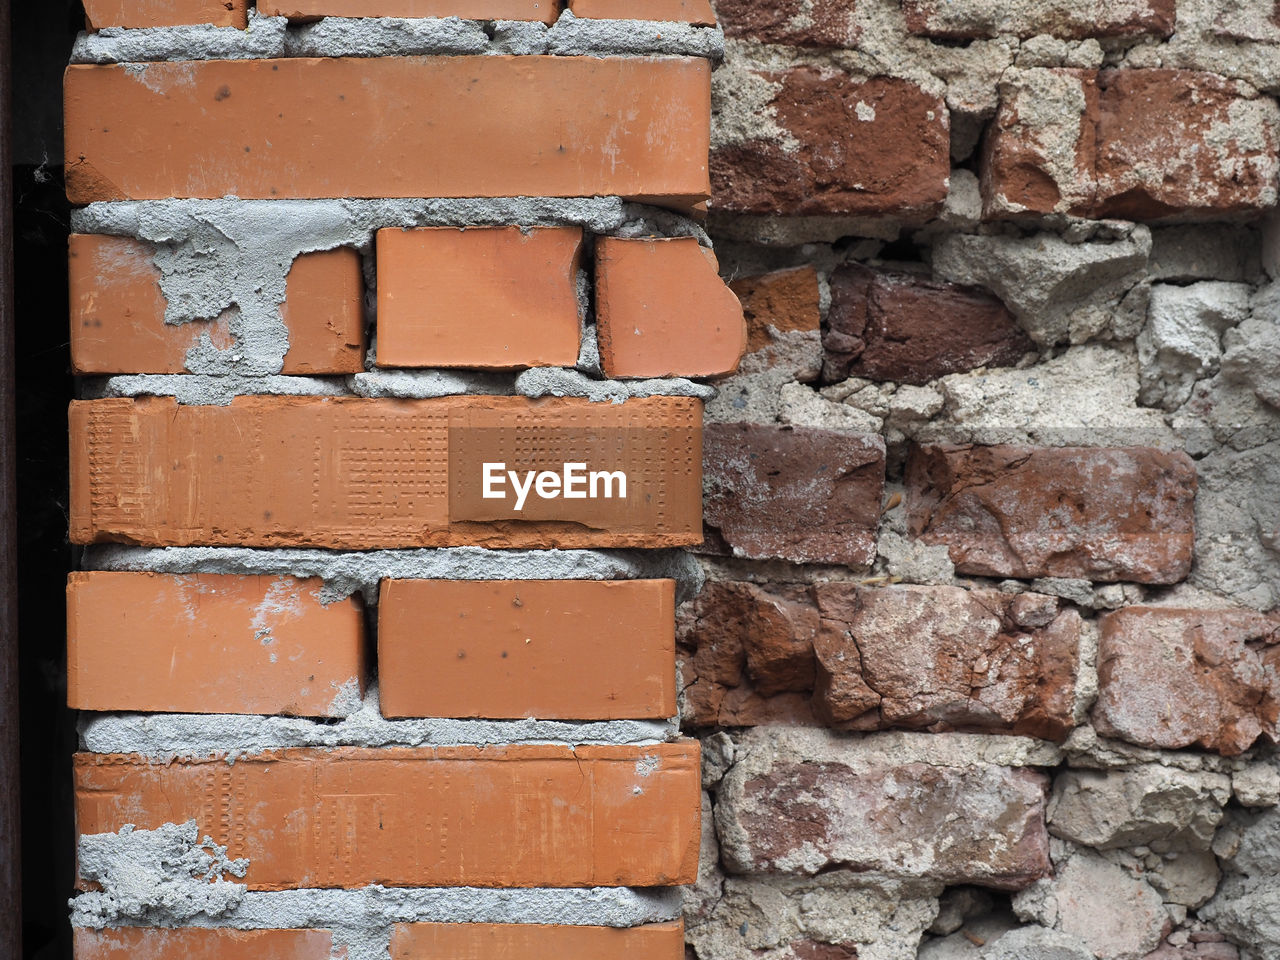 brick, brickwork, brick wall, wall, architecture, wall - building feature, built structure, full frame, backgrounds, textured, no people, pattern, day, building exterior, old, close-up, construction material, brown, red, weathered, outdoors, rough